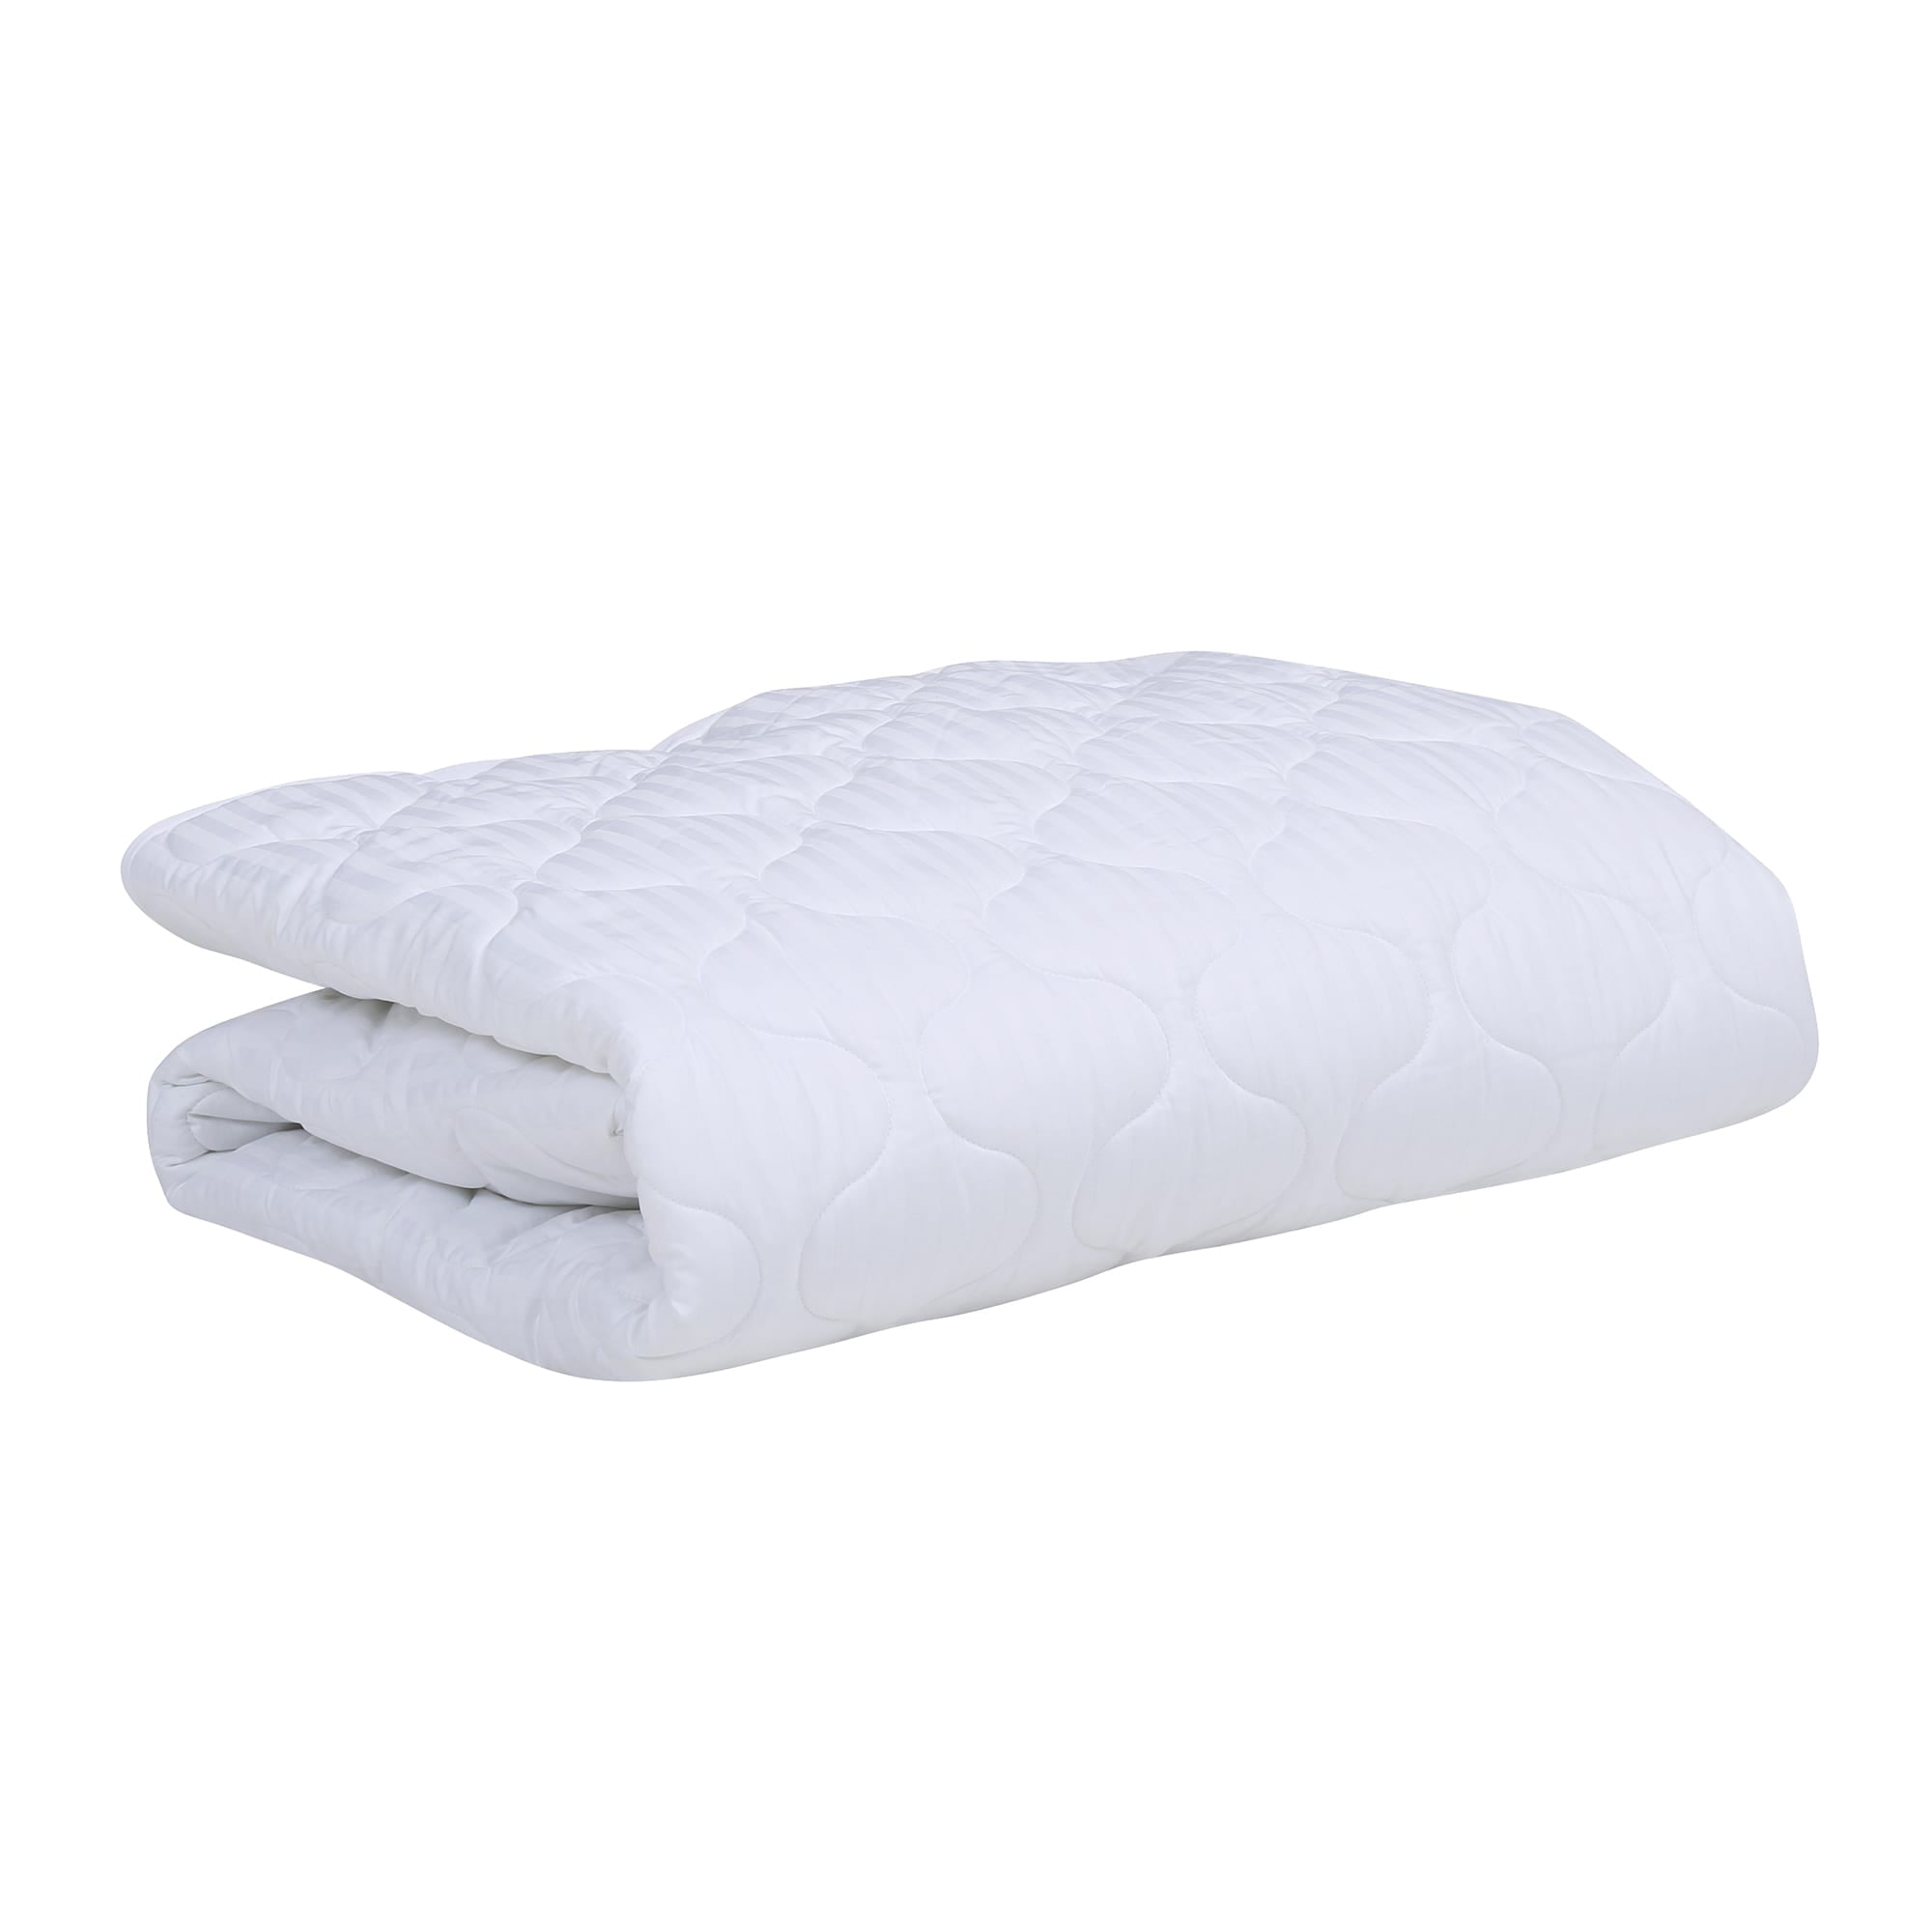 Cal King Details about   250-Thread Count Luxury Quilted Cotton Mattress Pad by Newpoint 